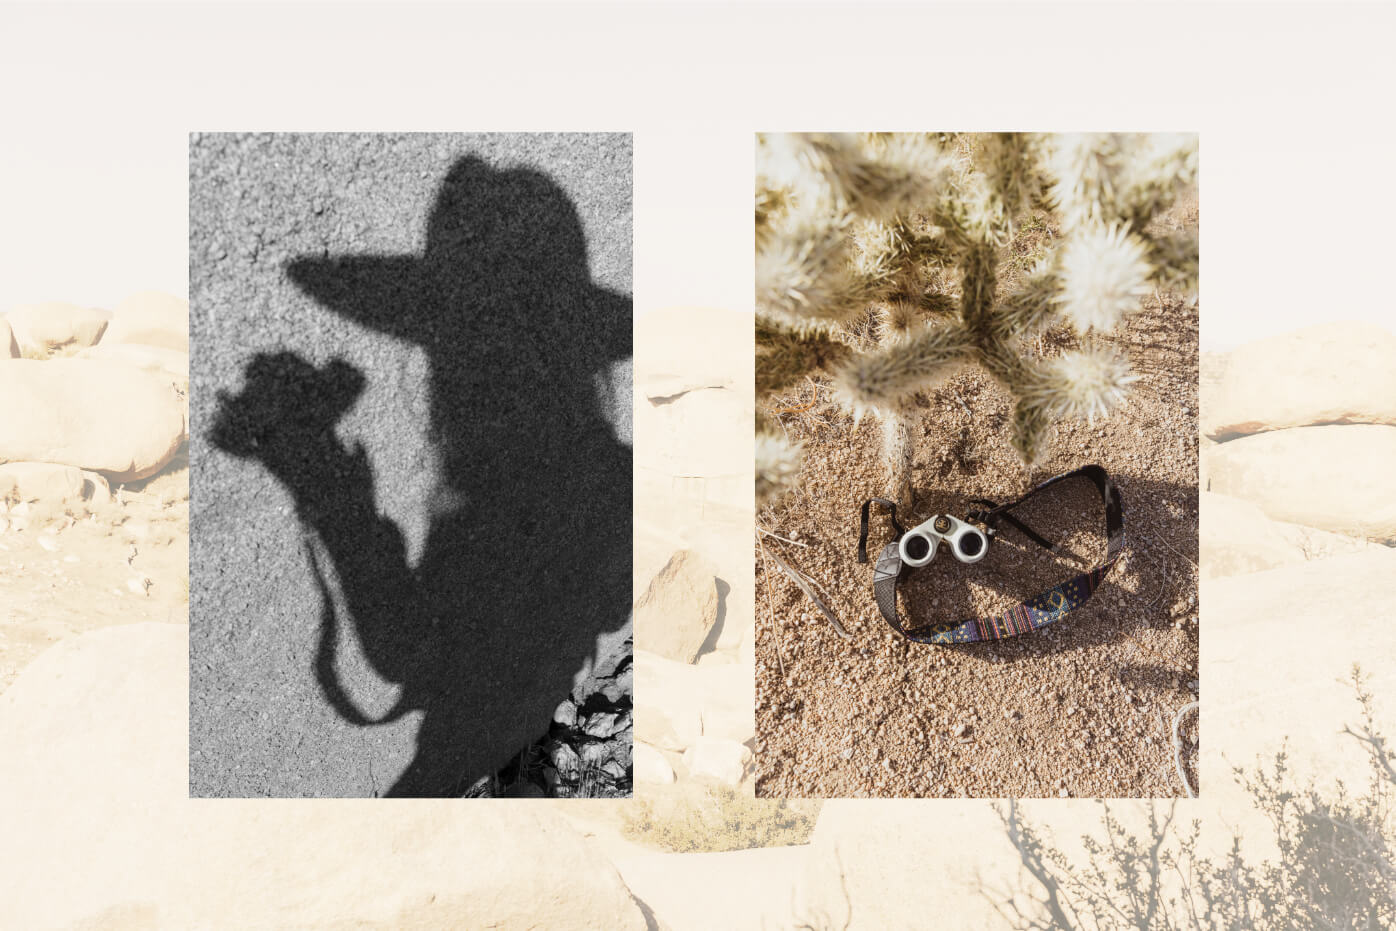 artistic image of Johnie Gall silhouette shadow, and Nocs near a cactus